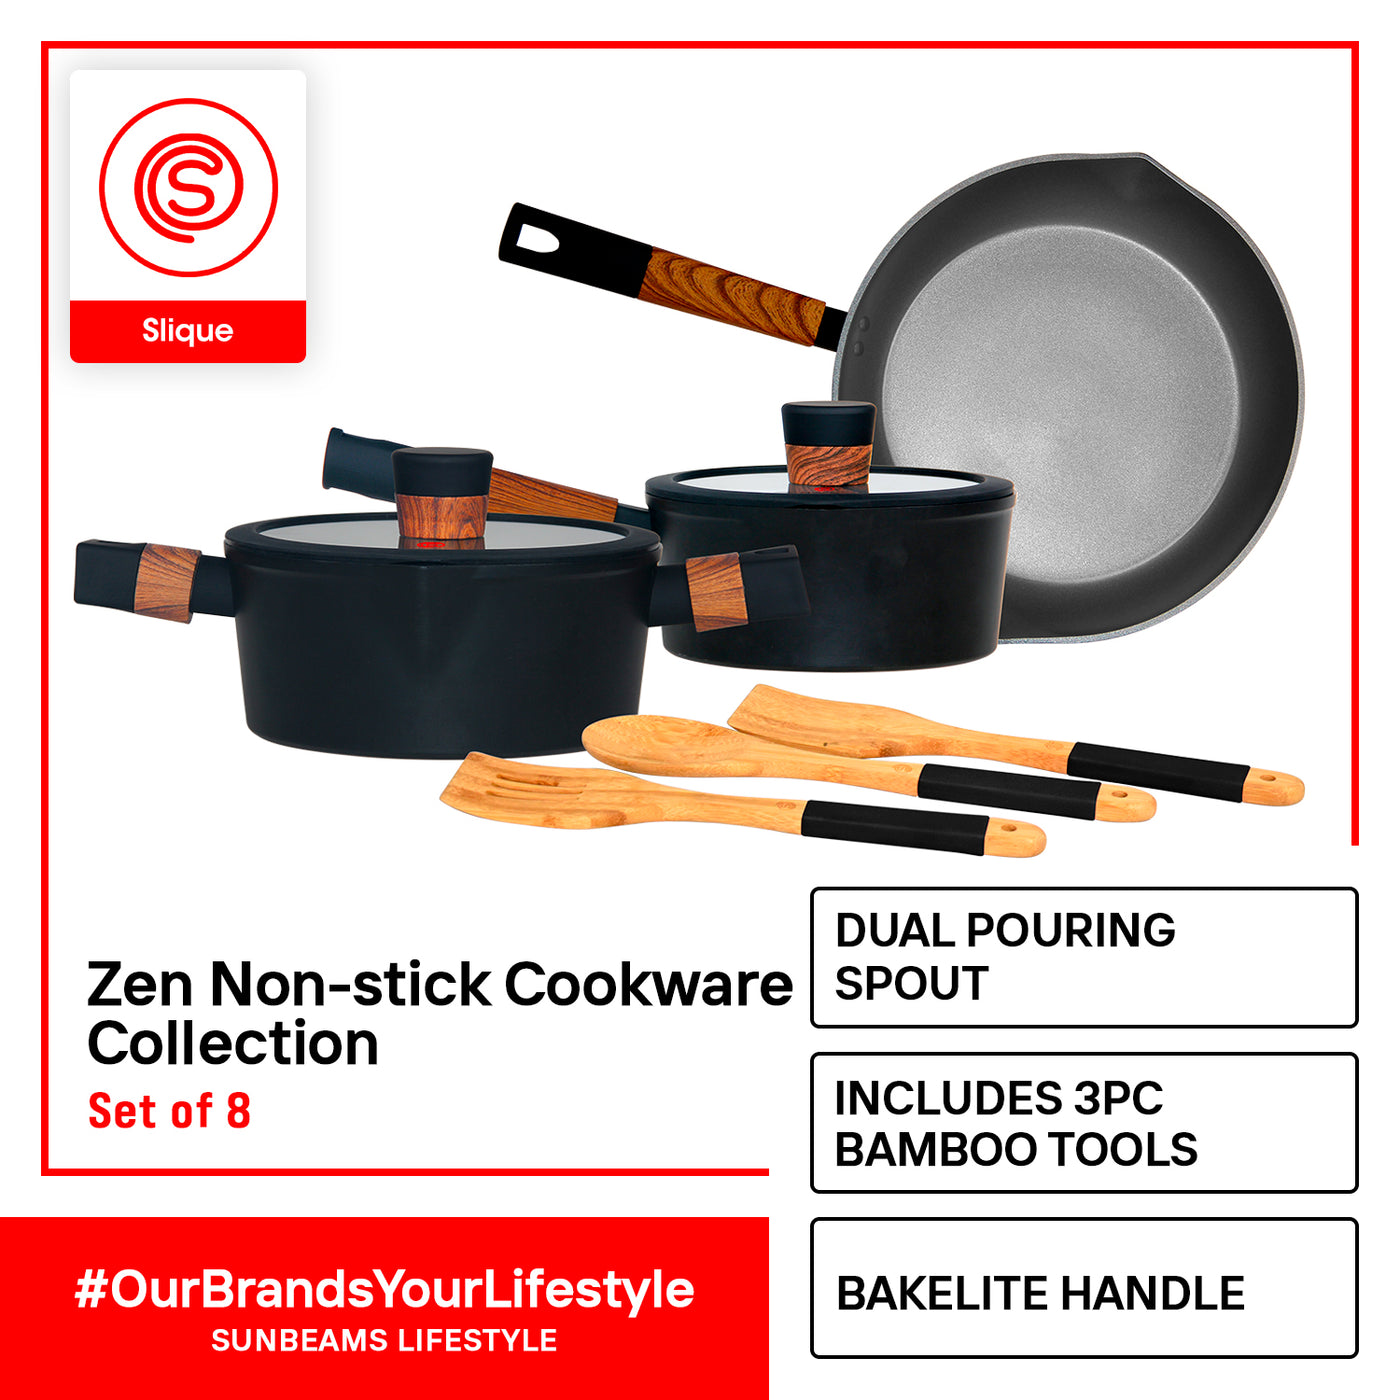 SLIQUE Zen Collection Cookware [Set of 8] Fry Pan | Dutch Oven | Saucepan | Kitchen Tools Non-stick | Induction Amazing Gift Idea For Any Occasion!